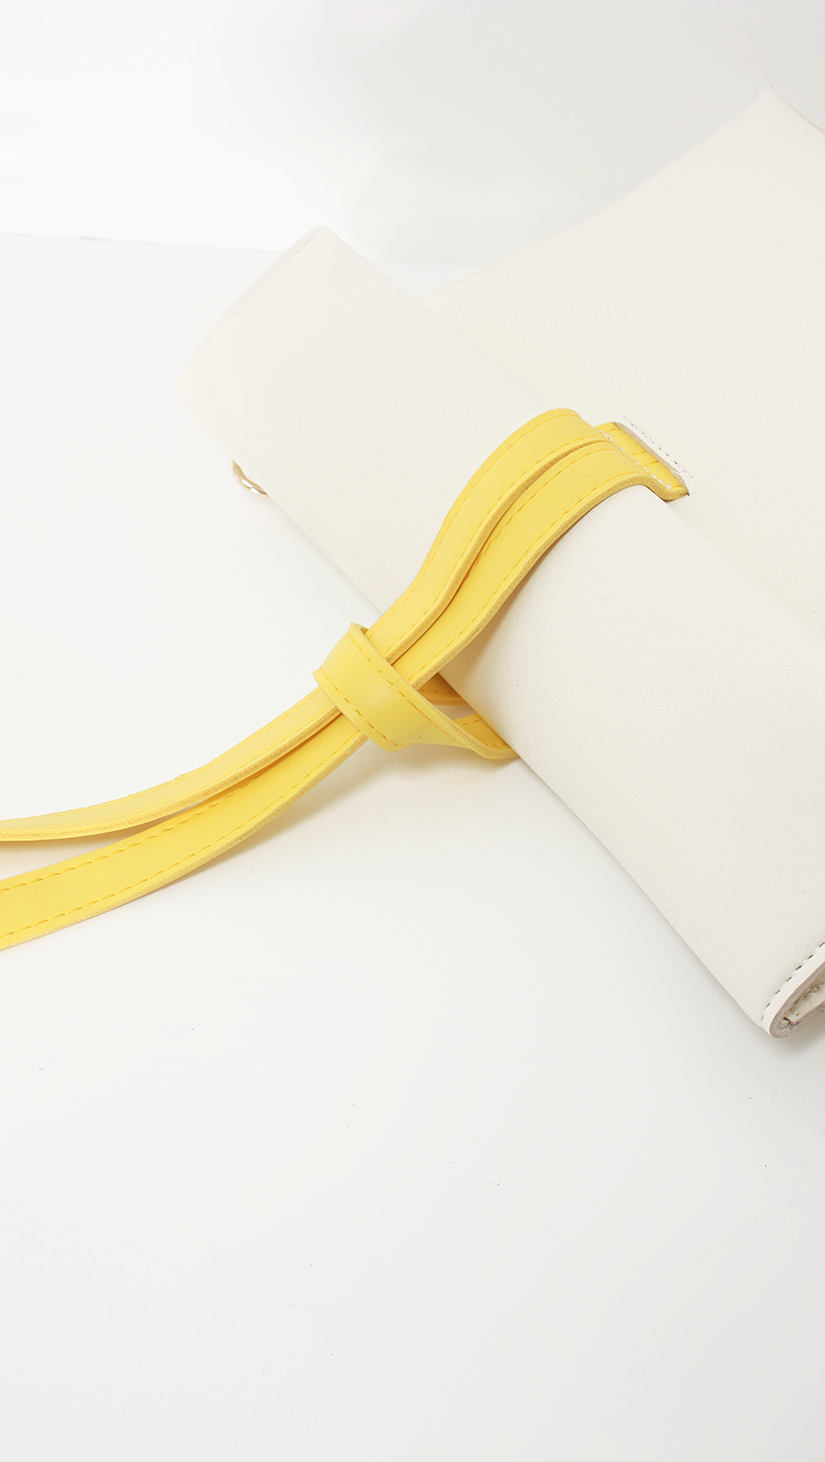 Melgar Cluth, a lightweight smooth pu leather with minimal styling in Yellow